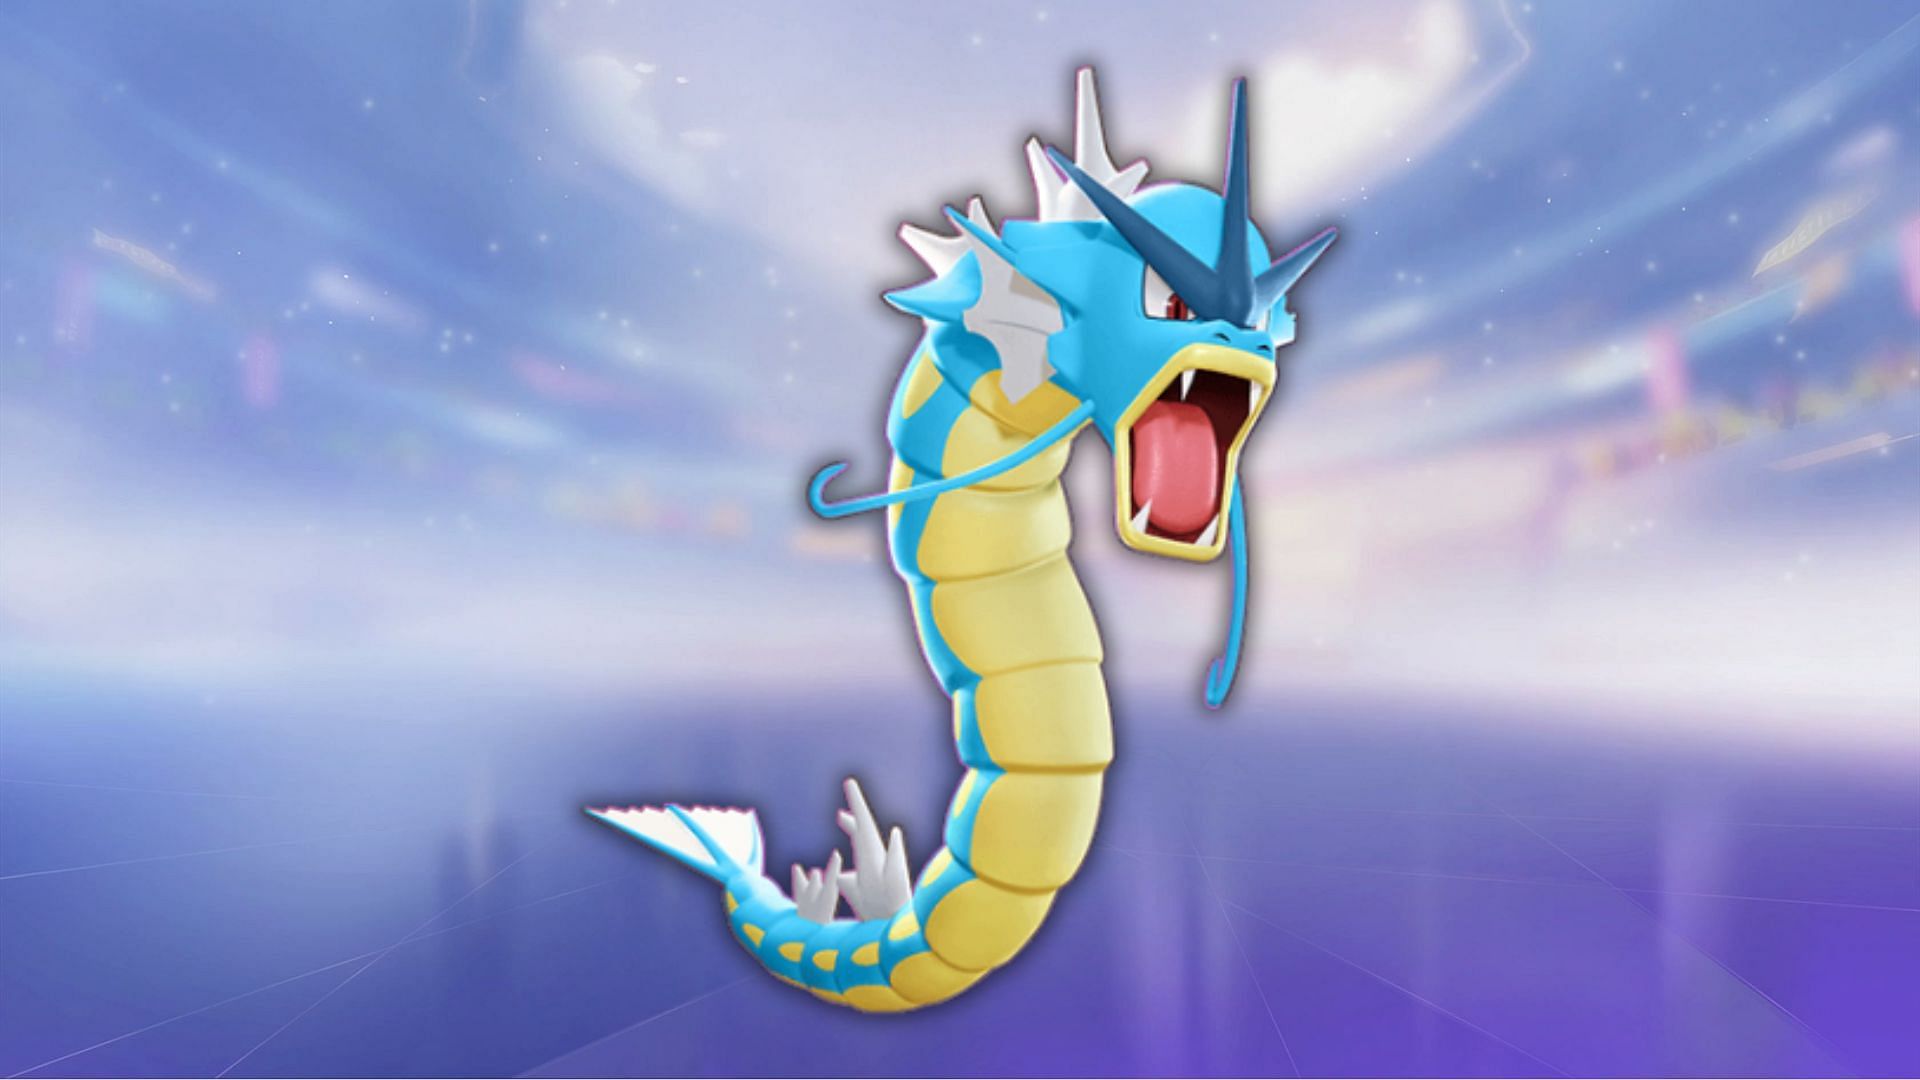 Gyarados mains have to be more cautious with its Unite Move (Image via The Pokemon Company)